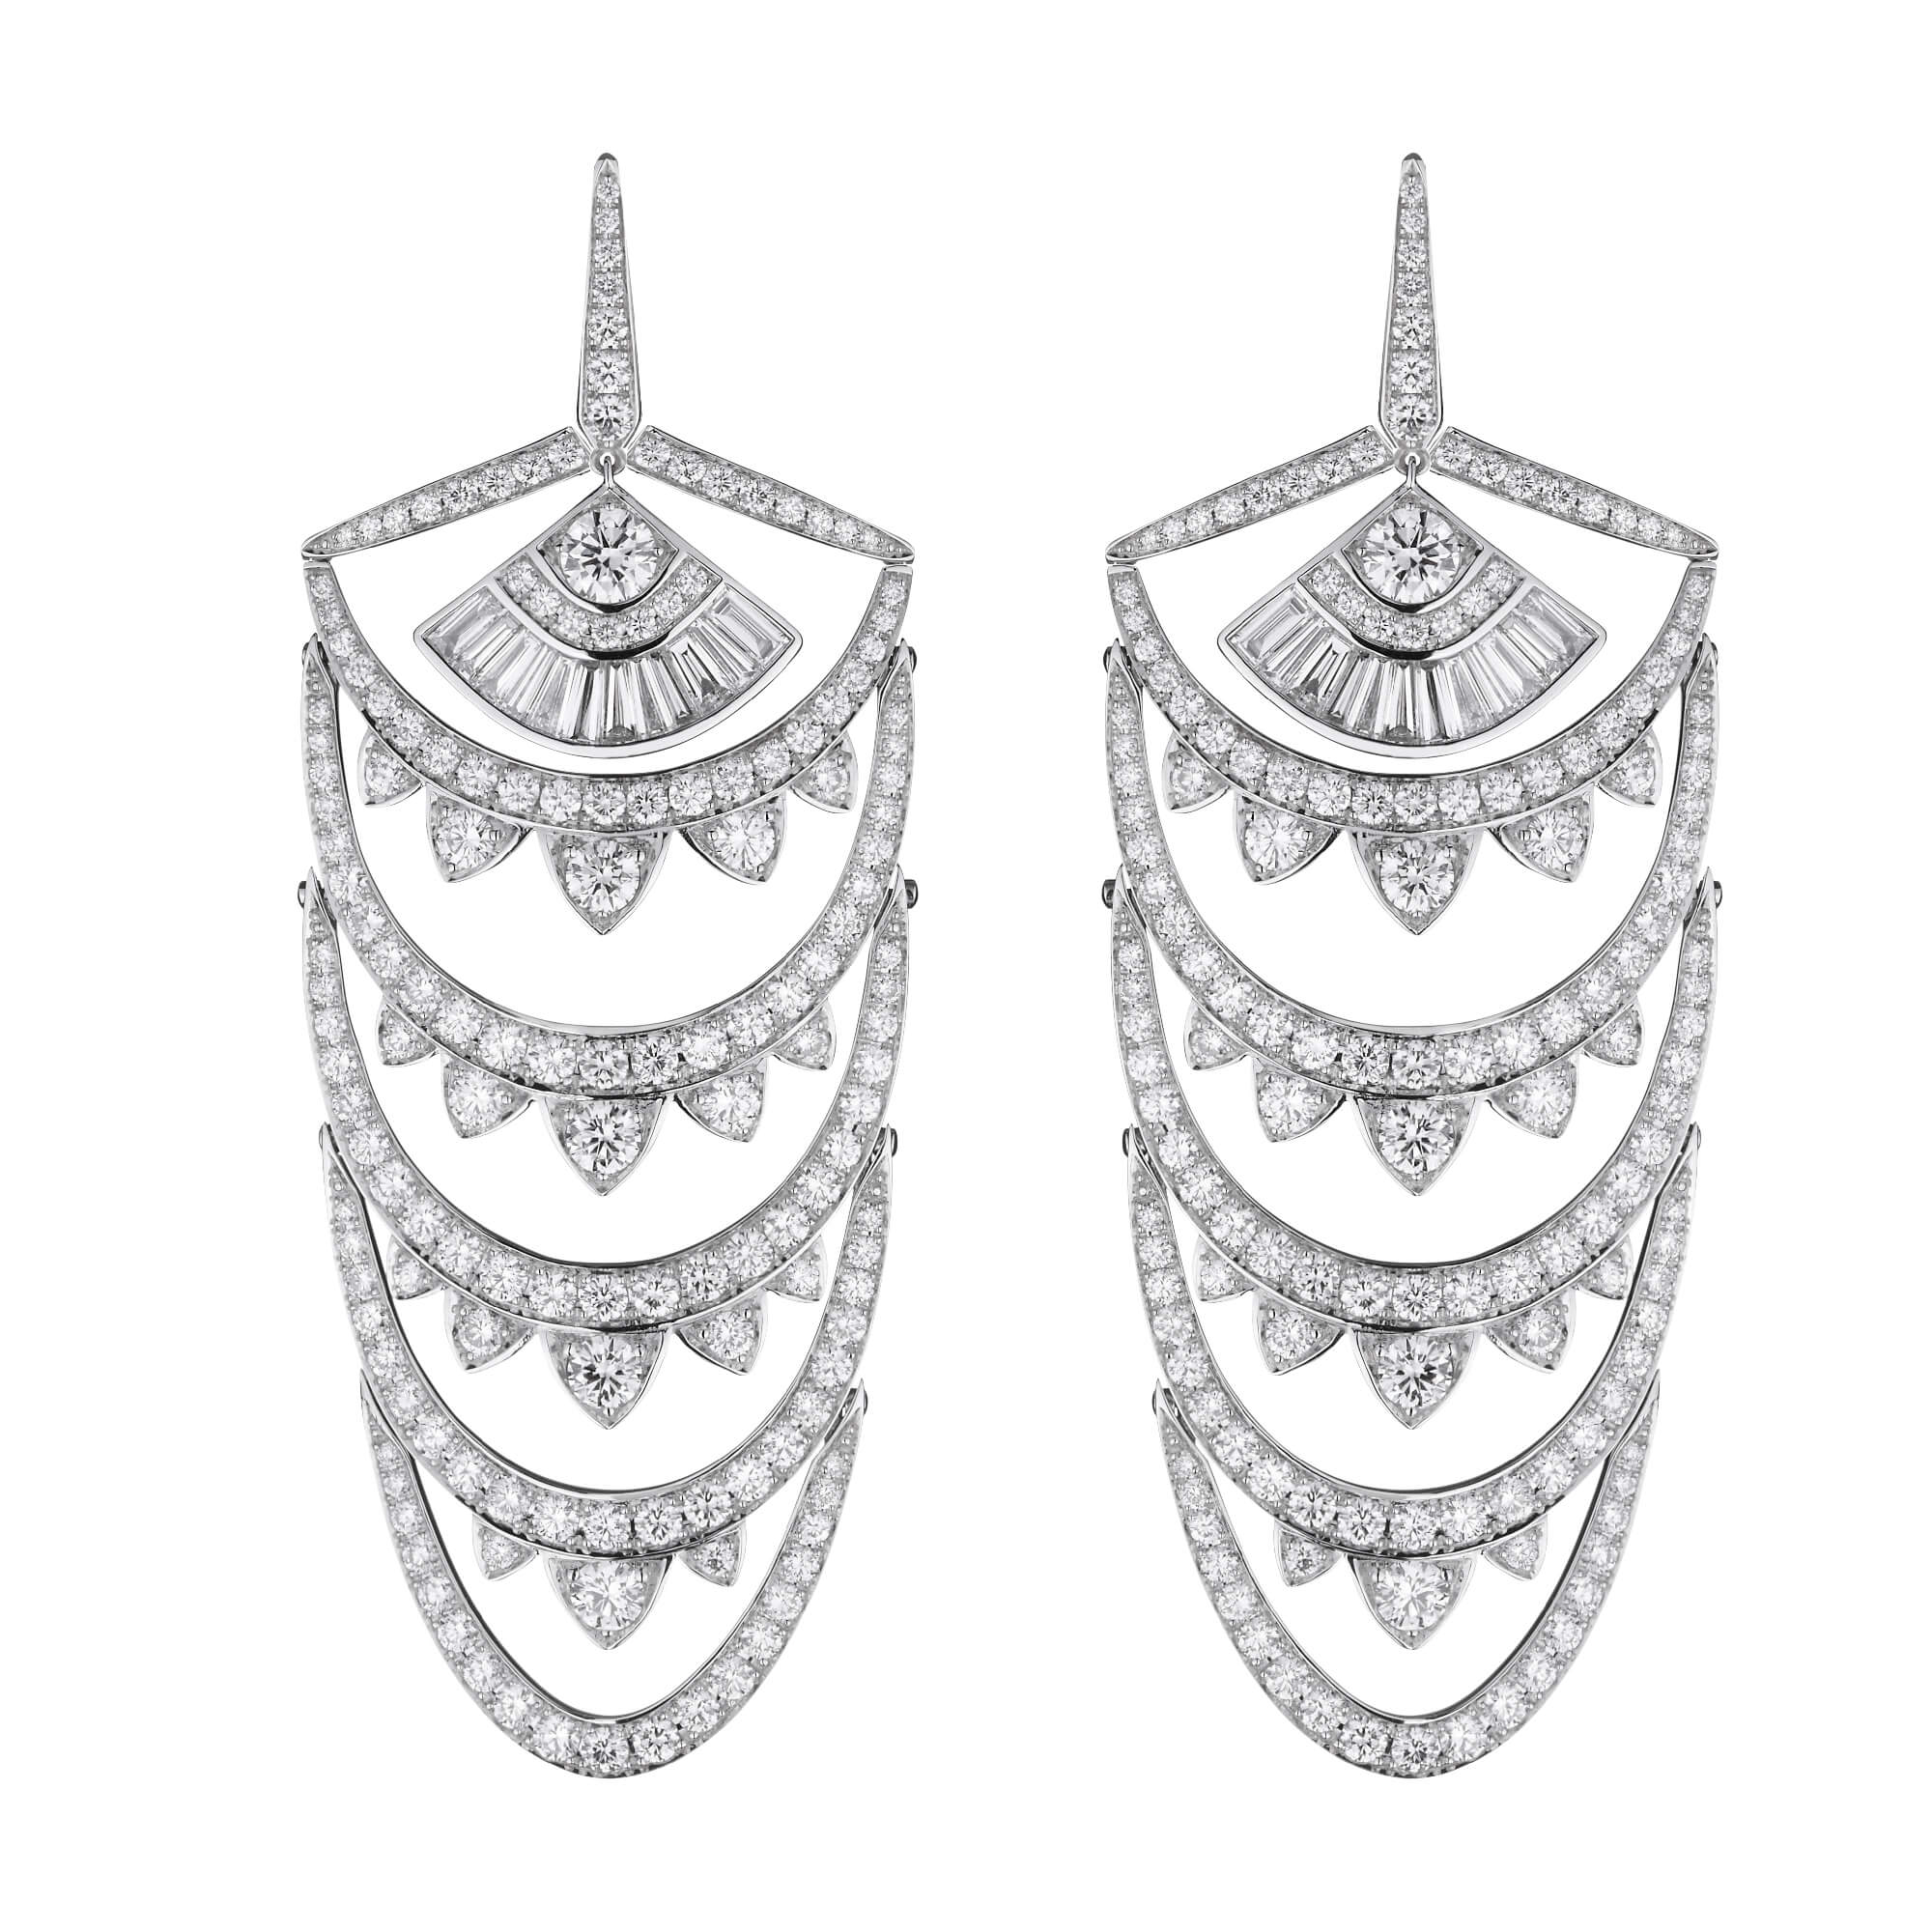 No Regrets New York Earrings in White Gold